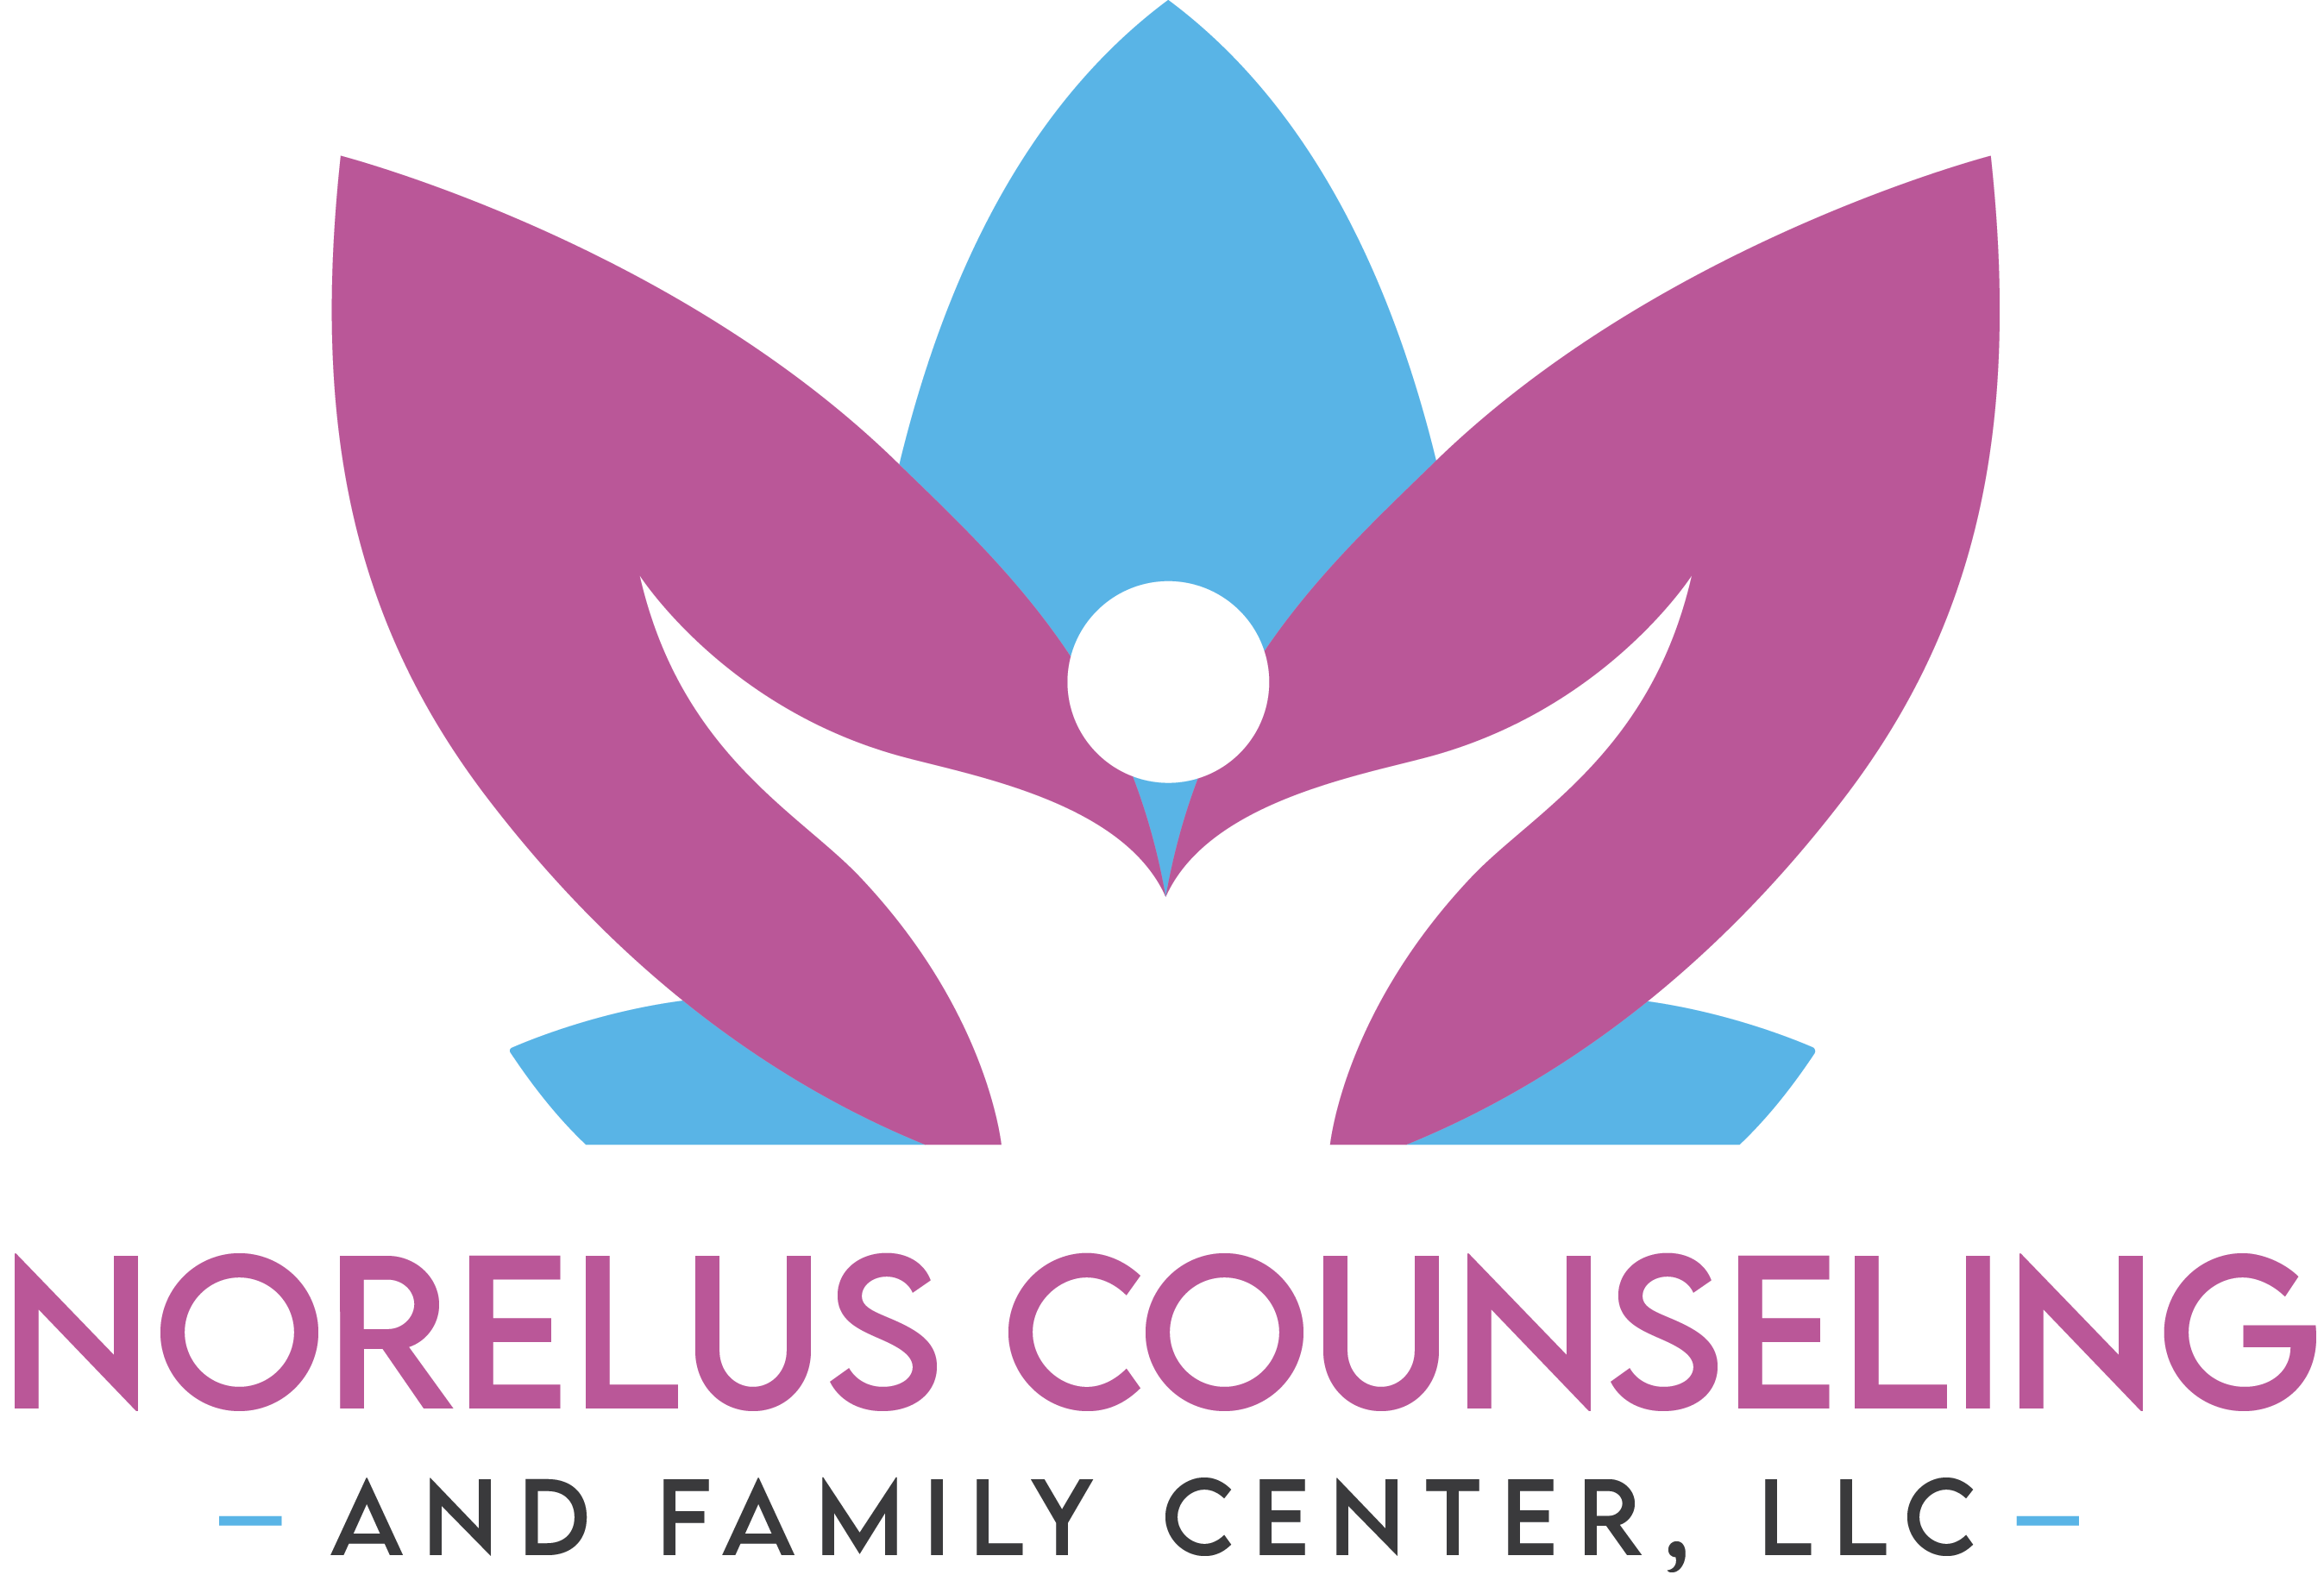 NORELUS-COUNSELING